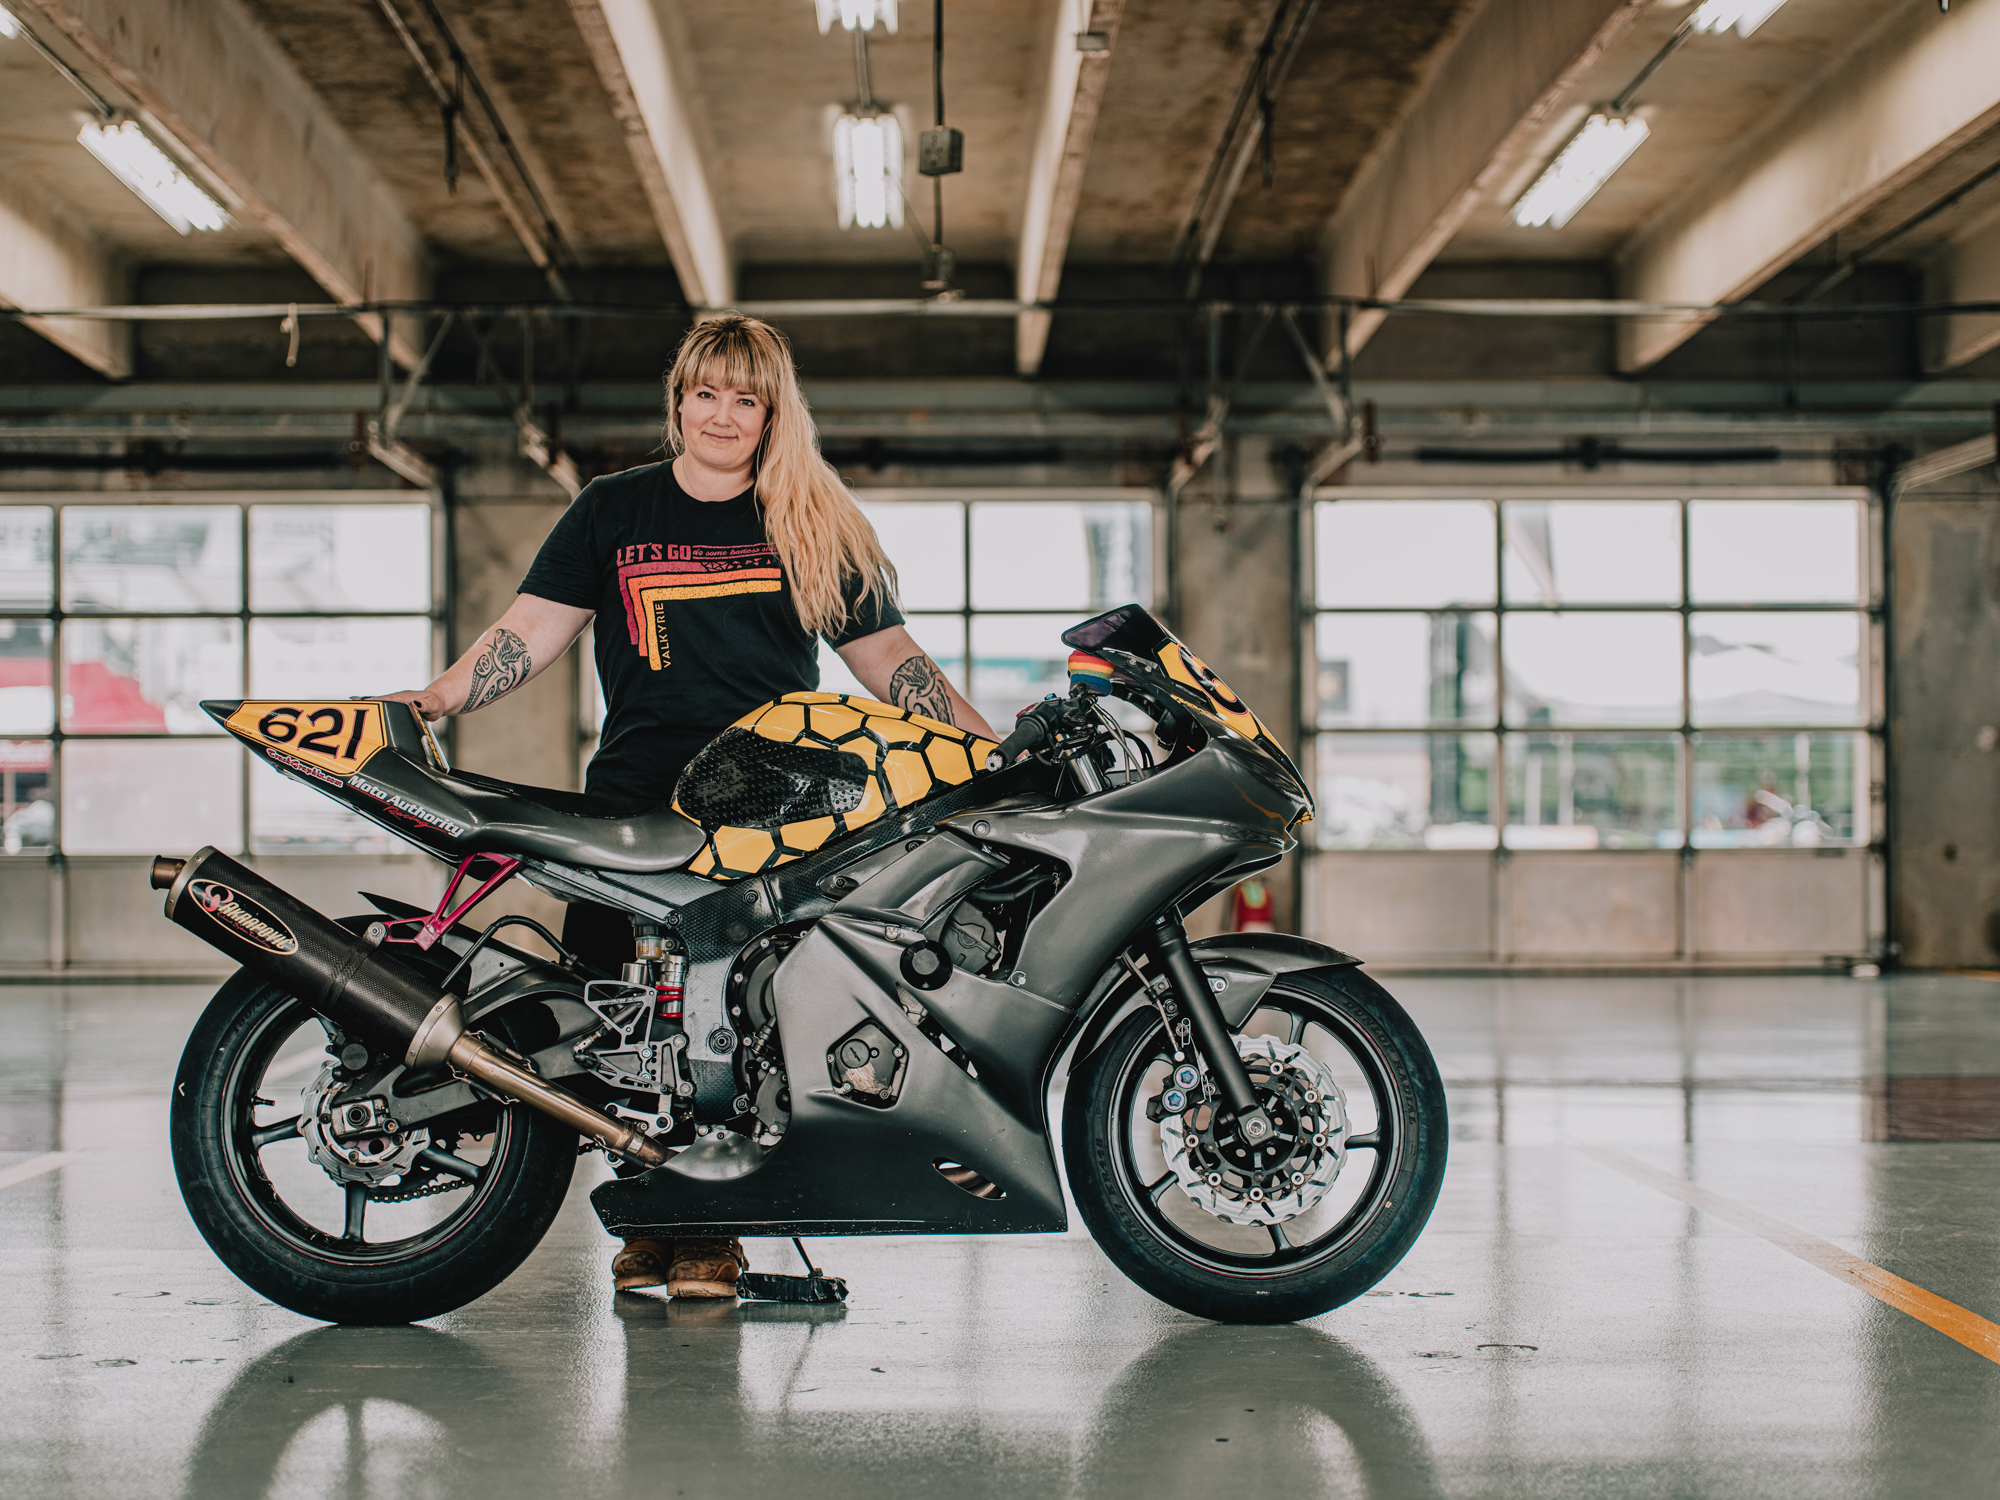 Women's Motorcycle Show 6 - Brittany Morrow of Rock the Gear